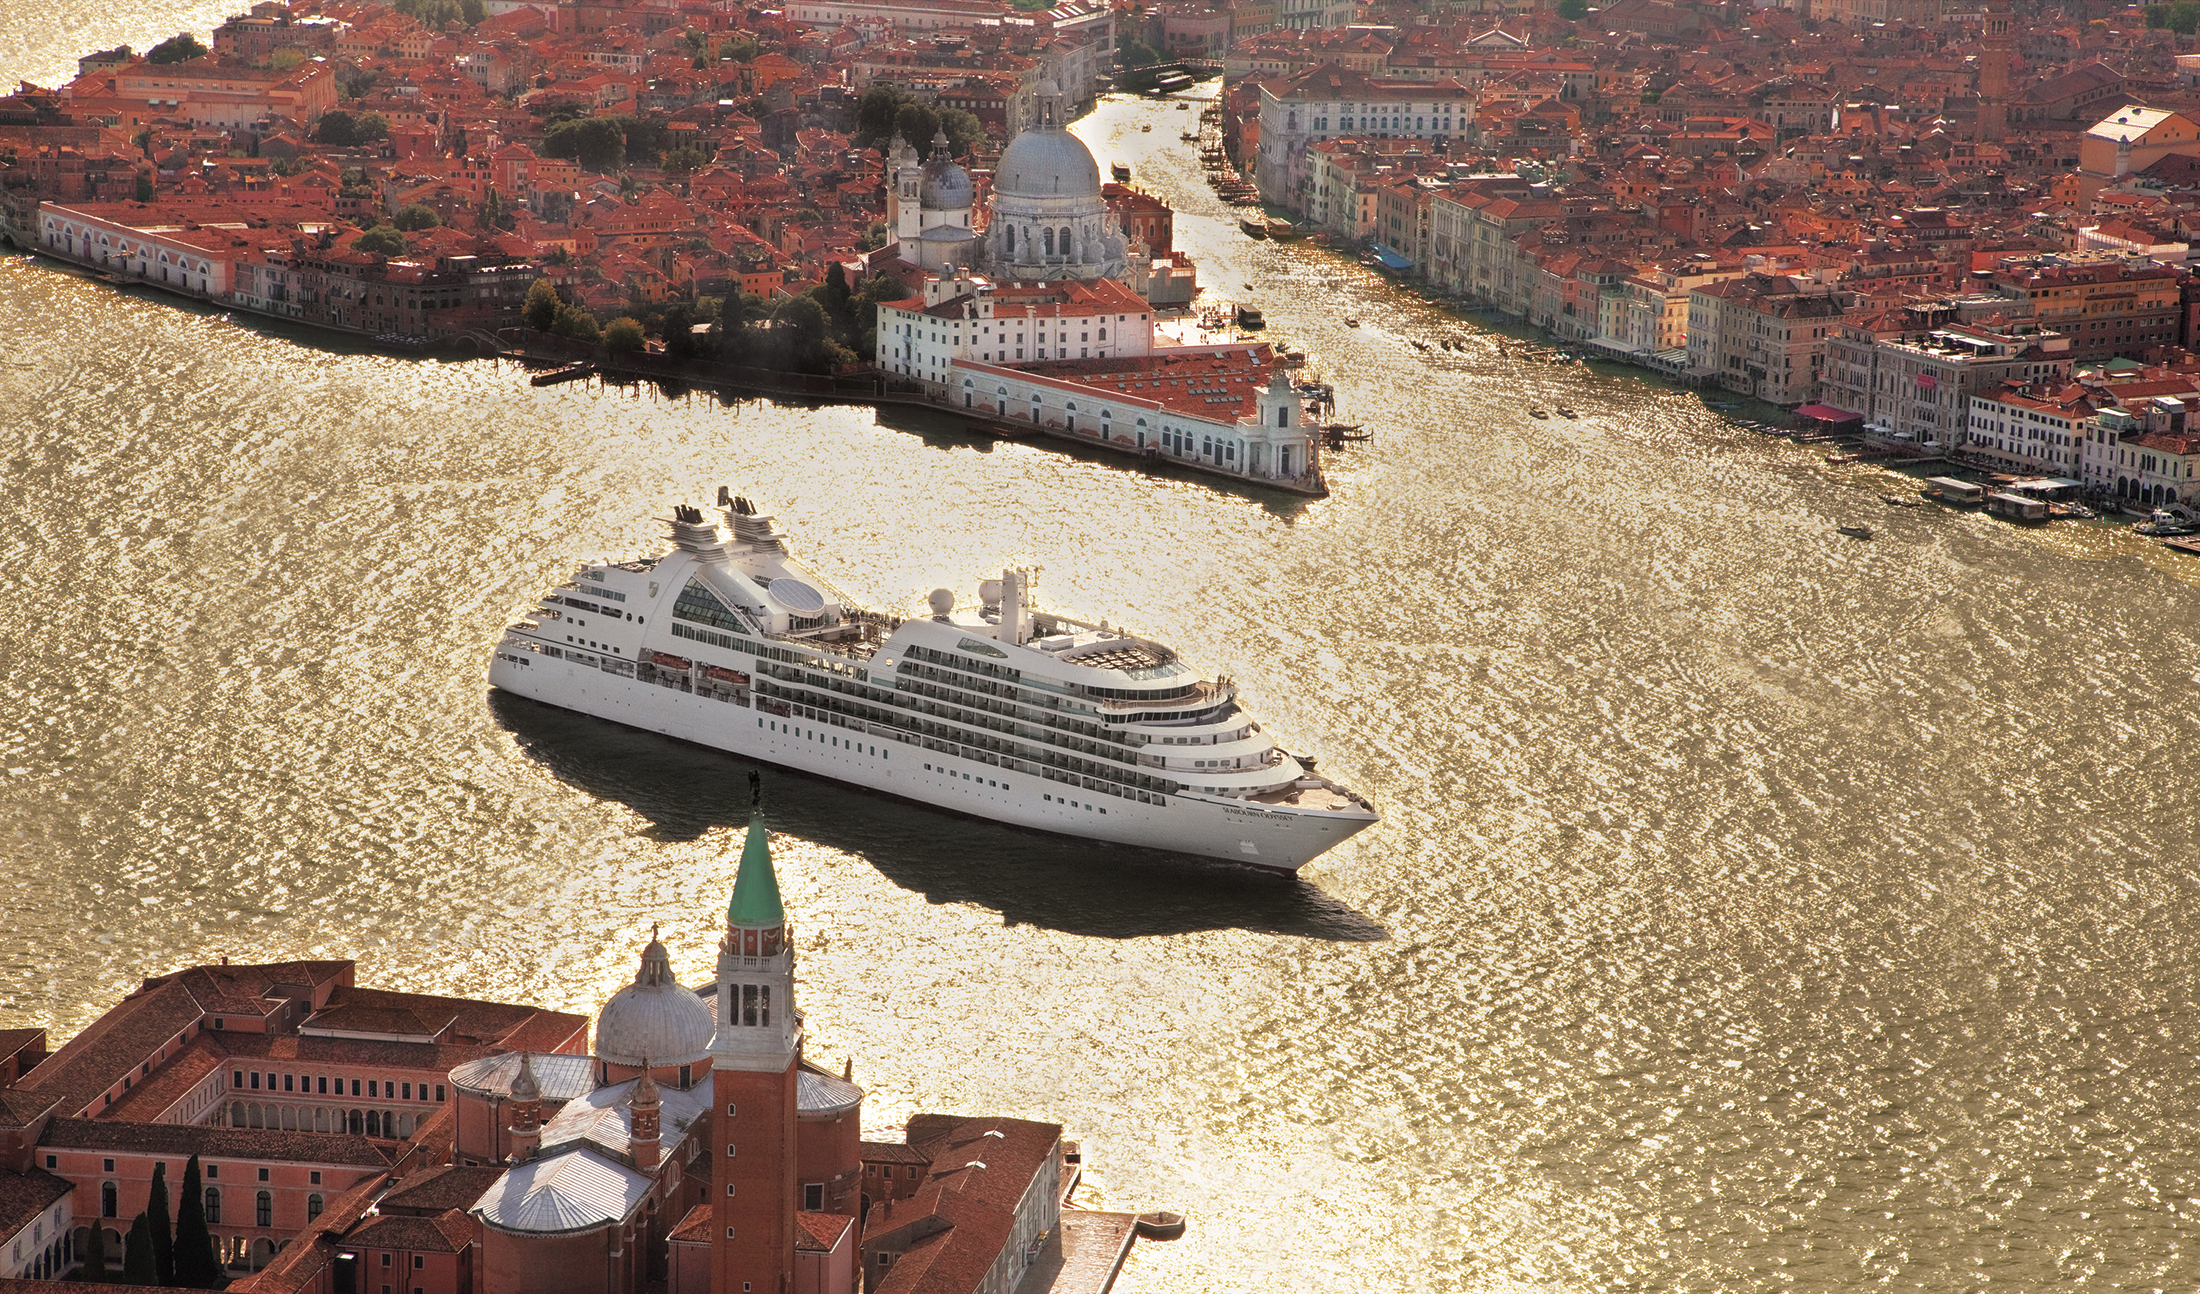 The Seabourn Odyssey - run by Seabourn Cruises - sails through Venice